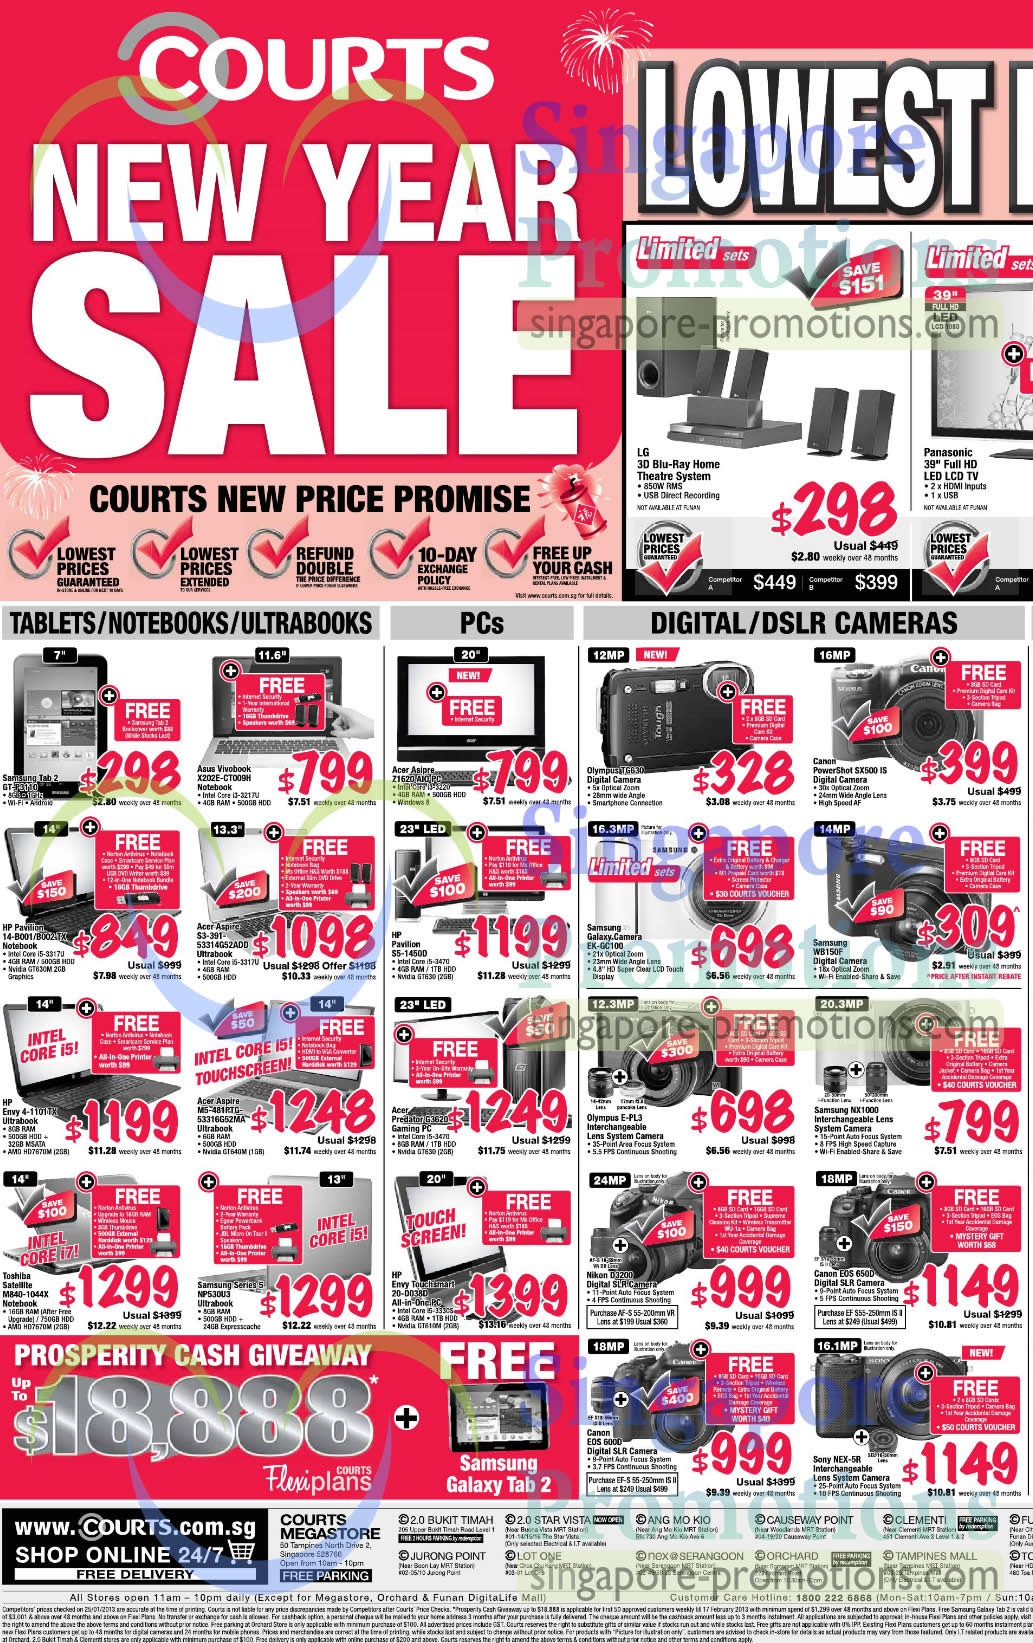 Featured image for Courts New Year Sale 26 - 27 Jan 2013 